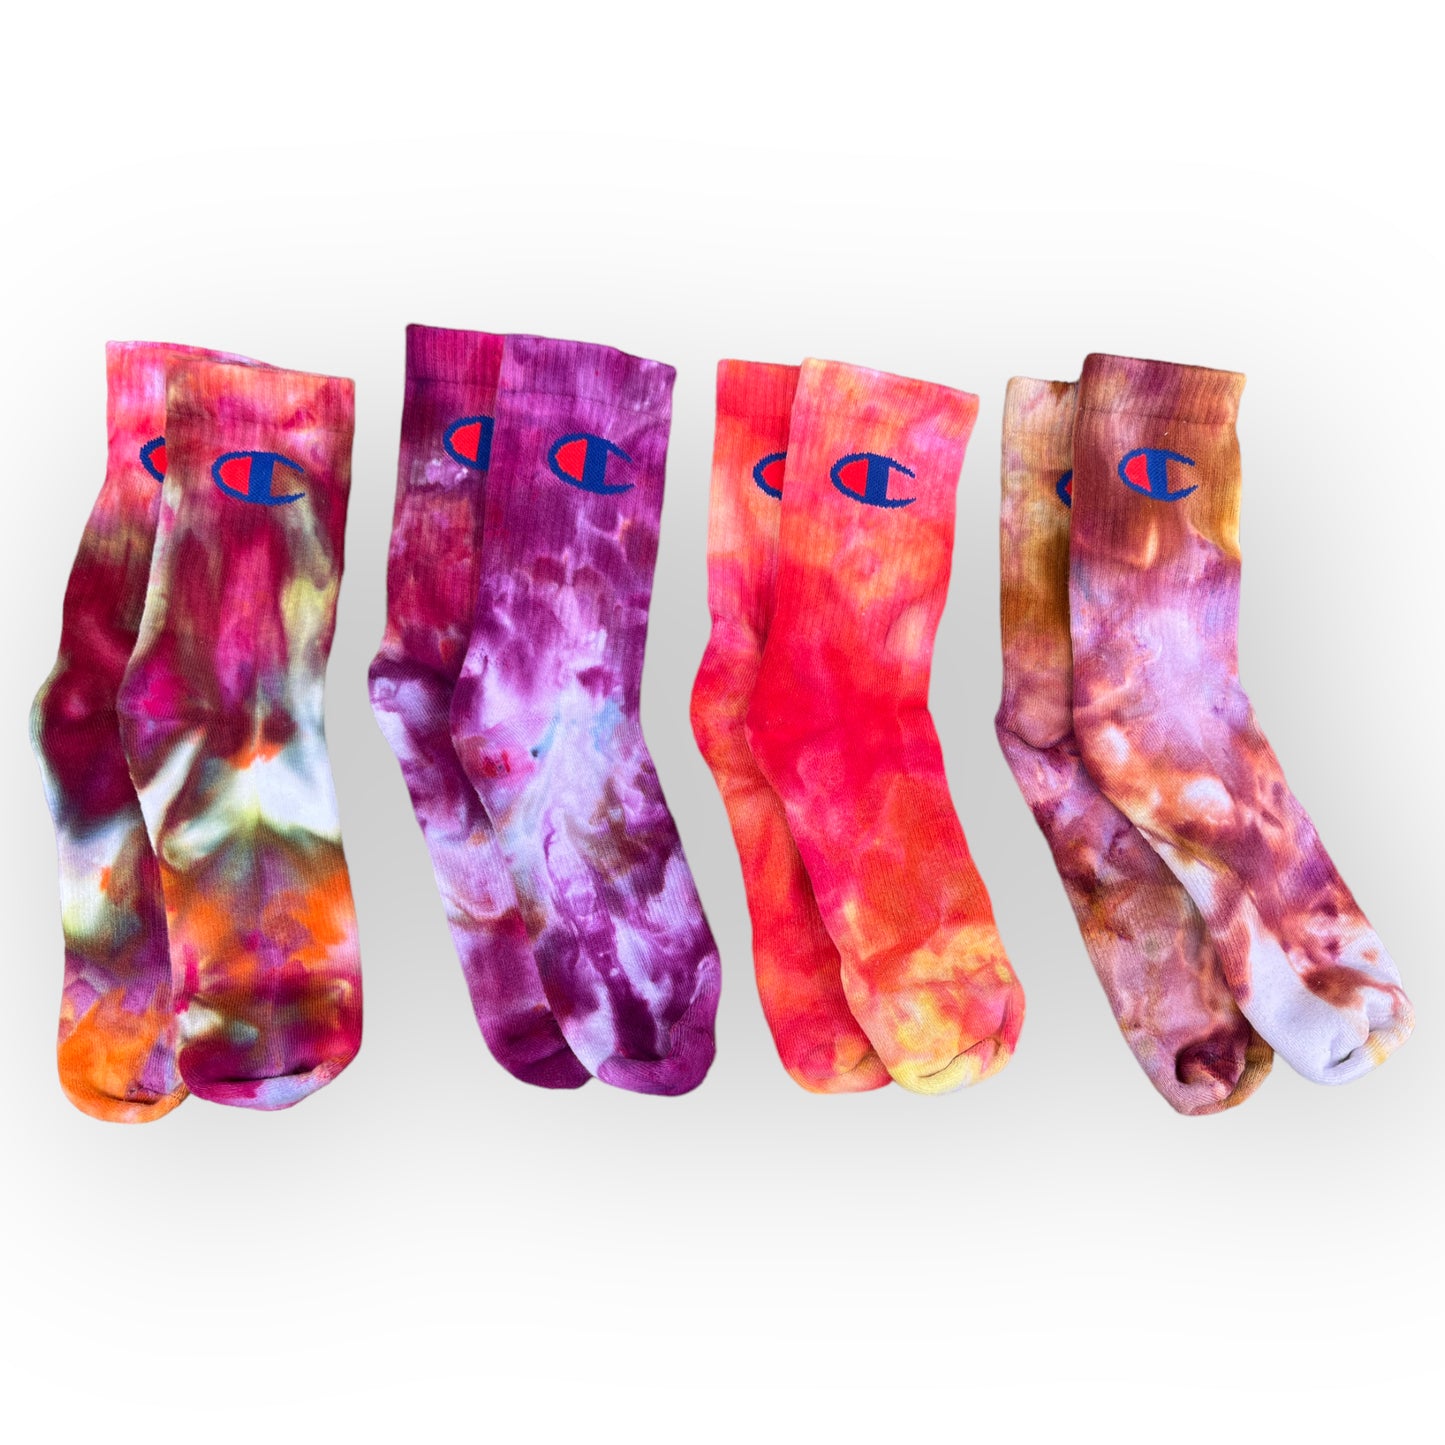 Load image into Gallery viewer, Tie Dye Socks - Adult Size 6-10
